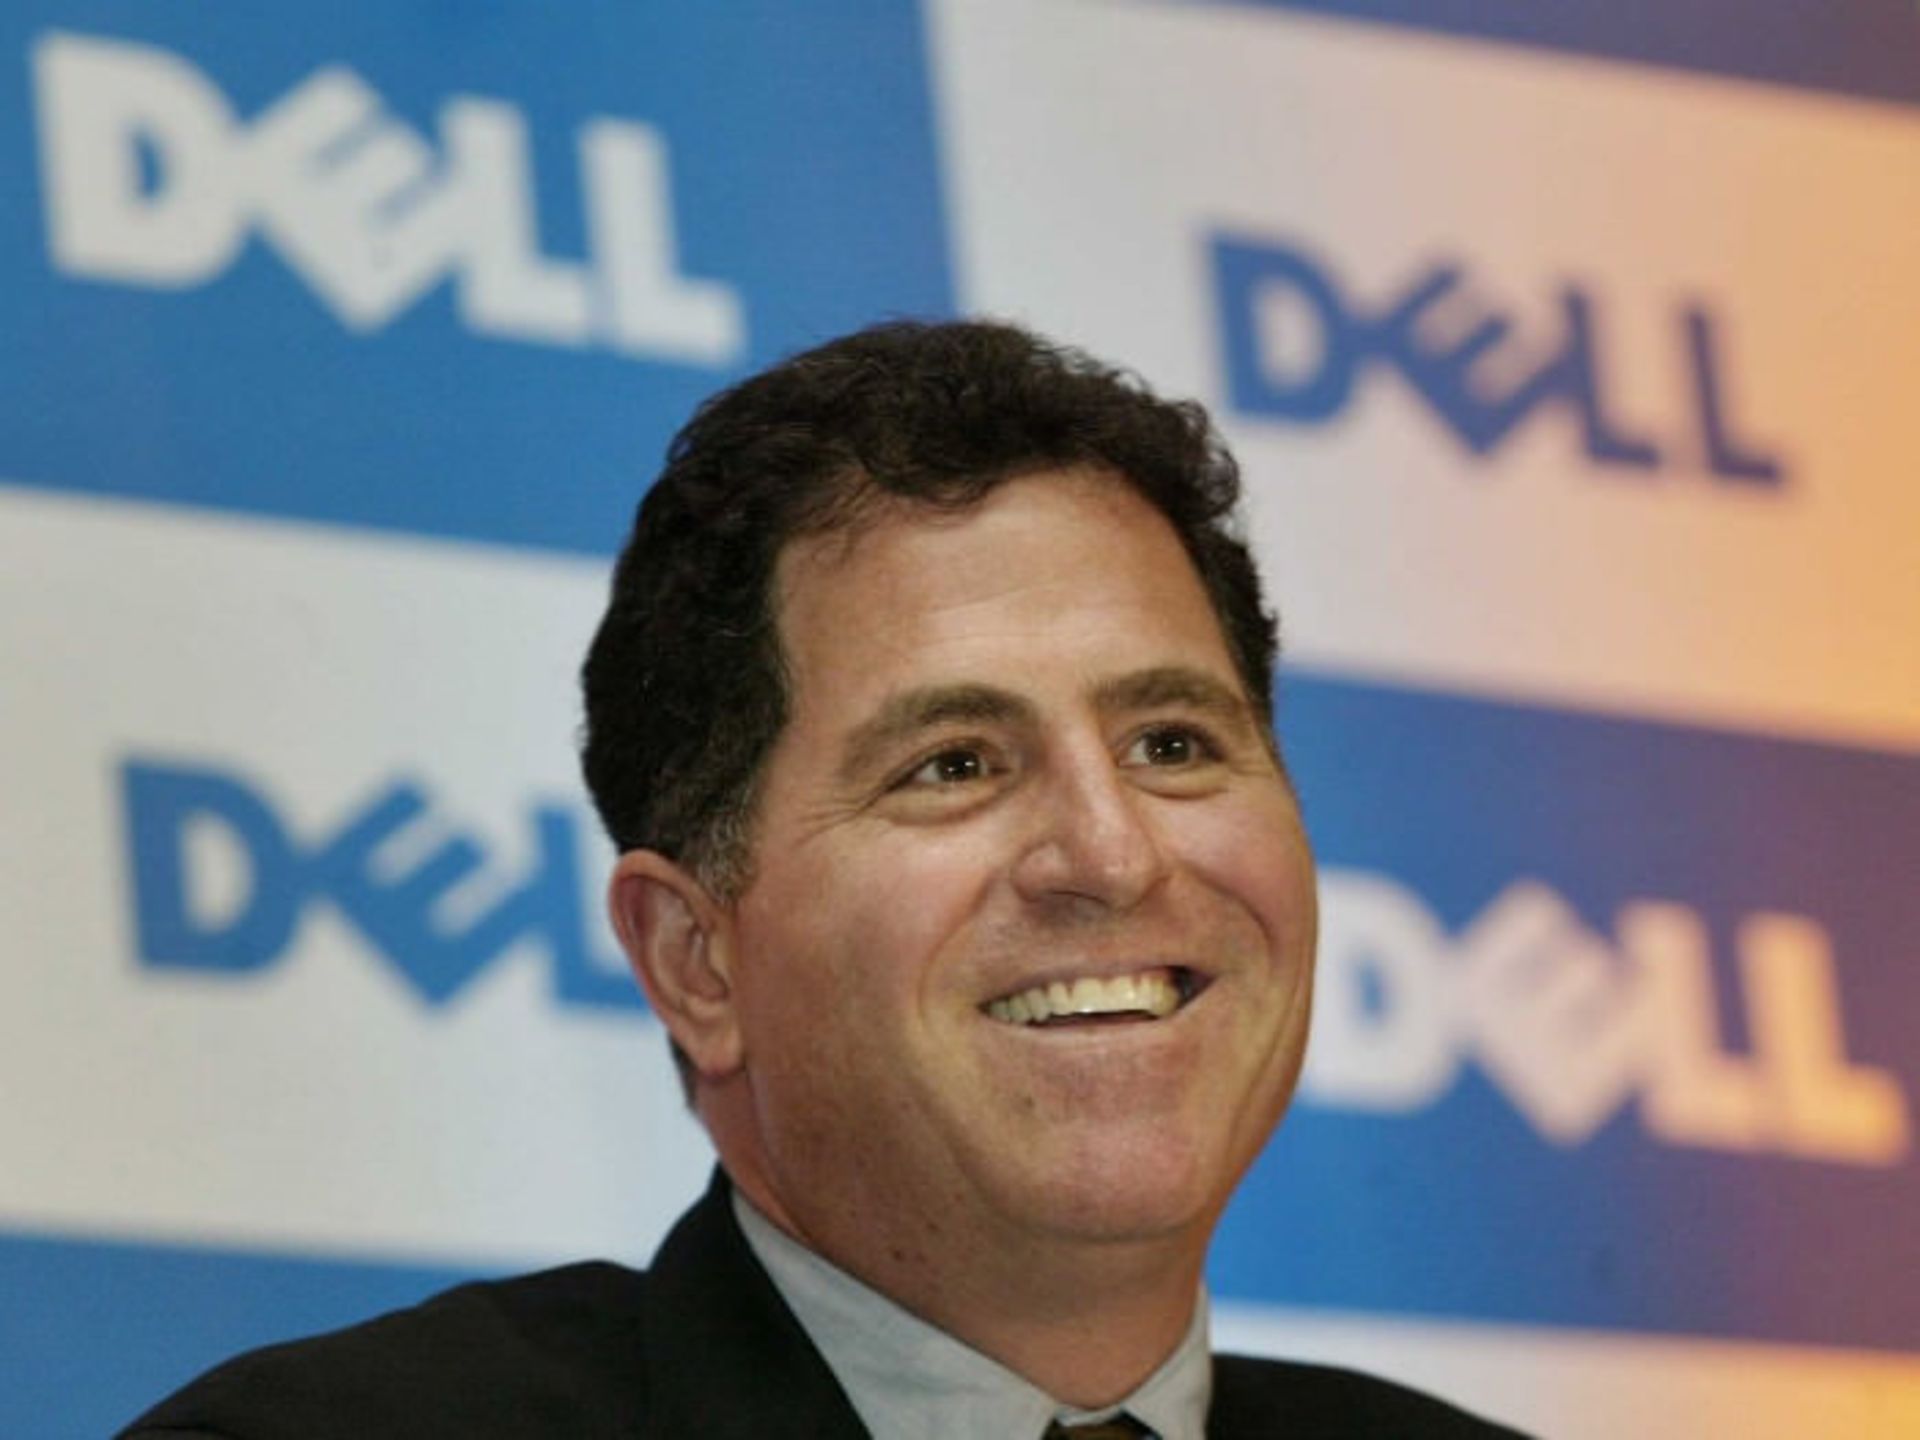 10-michael-dell-is-the-chairman-and-ceo-of-dell